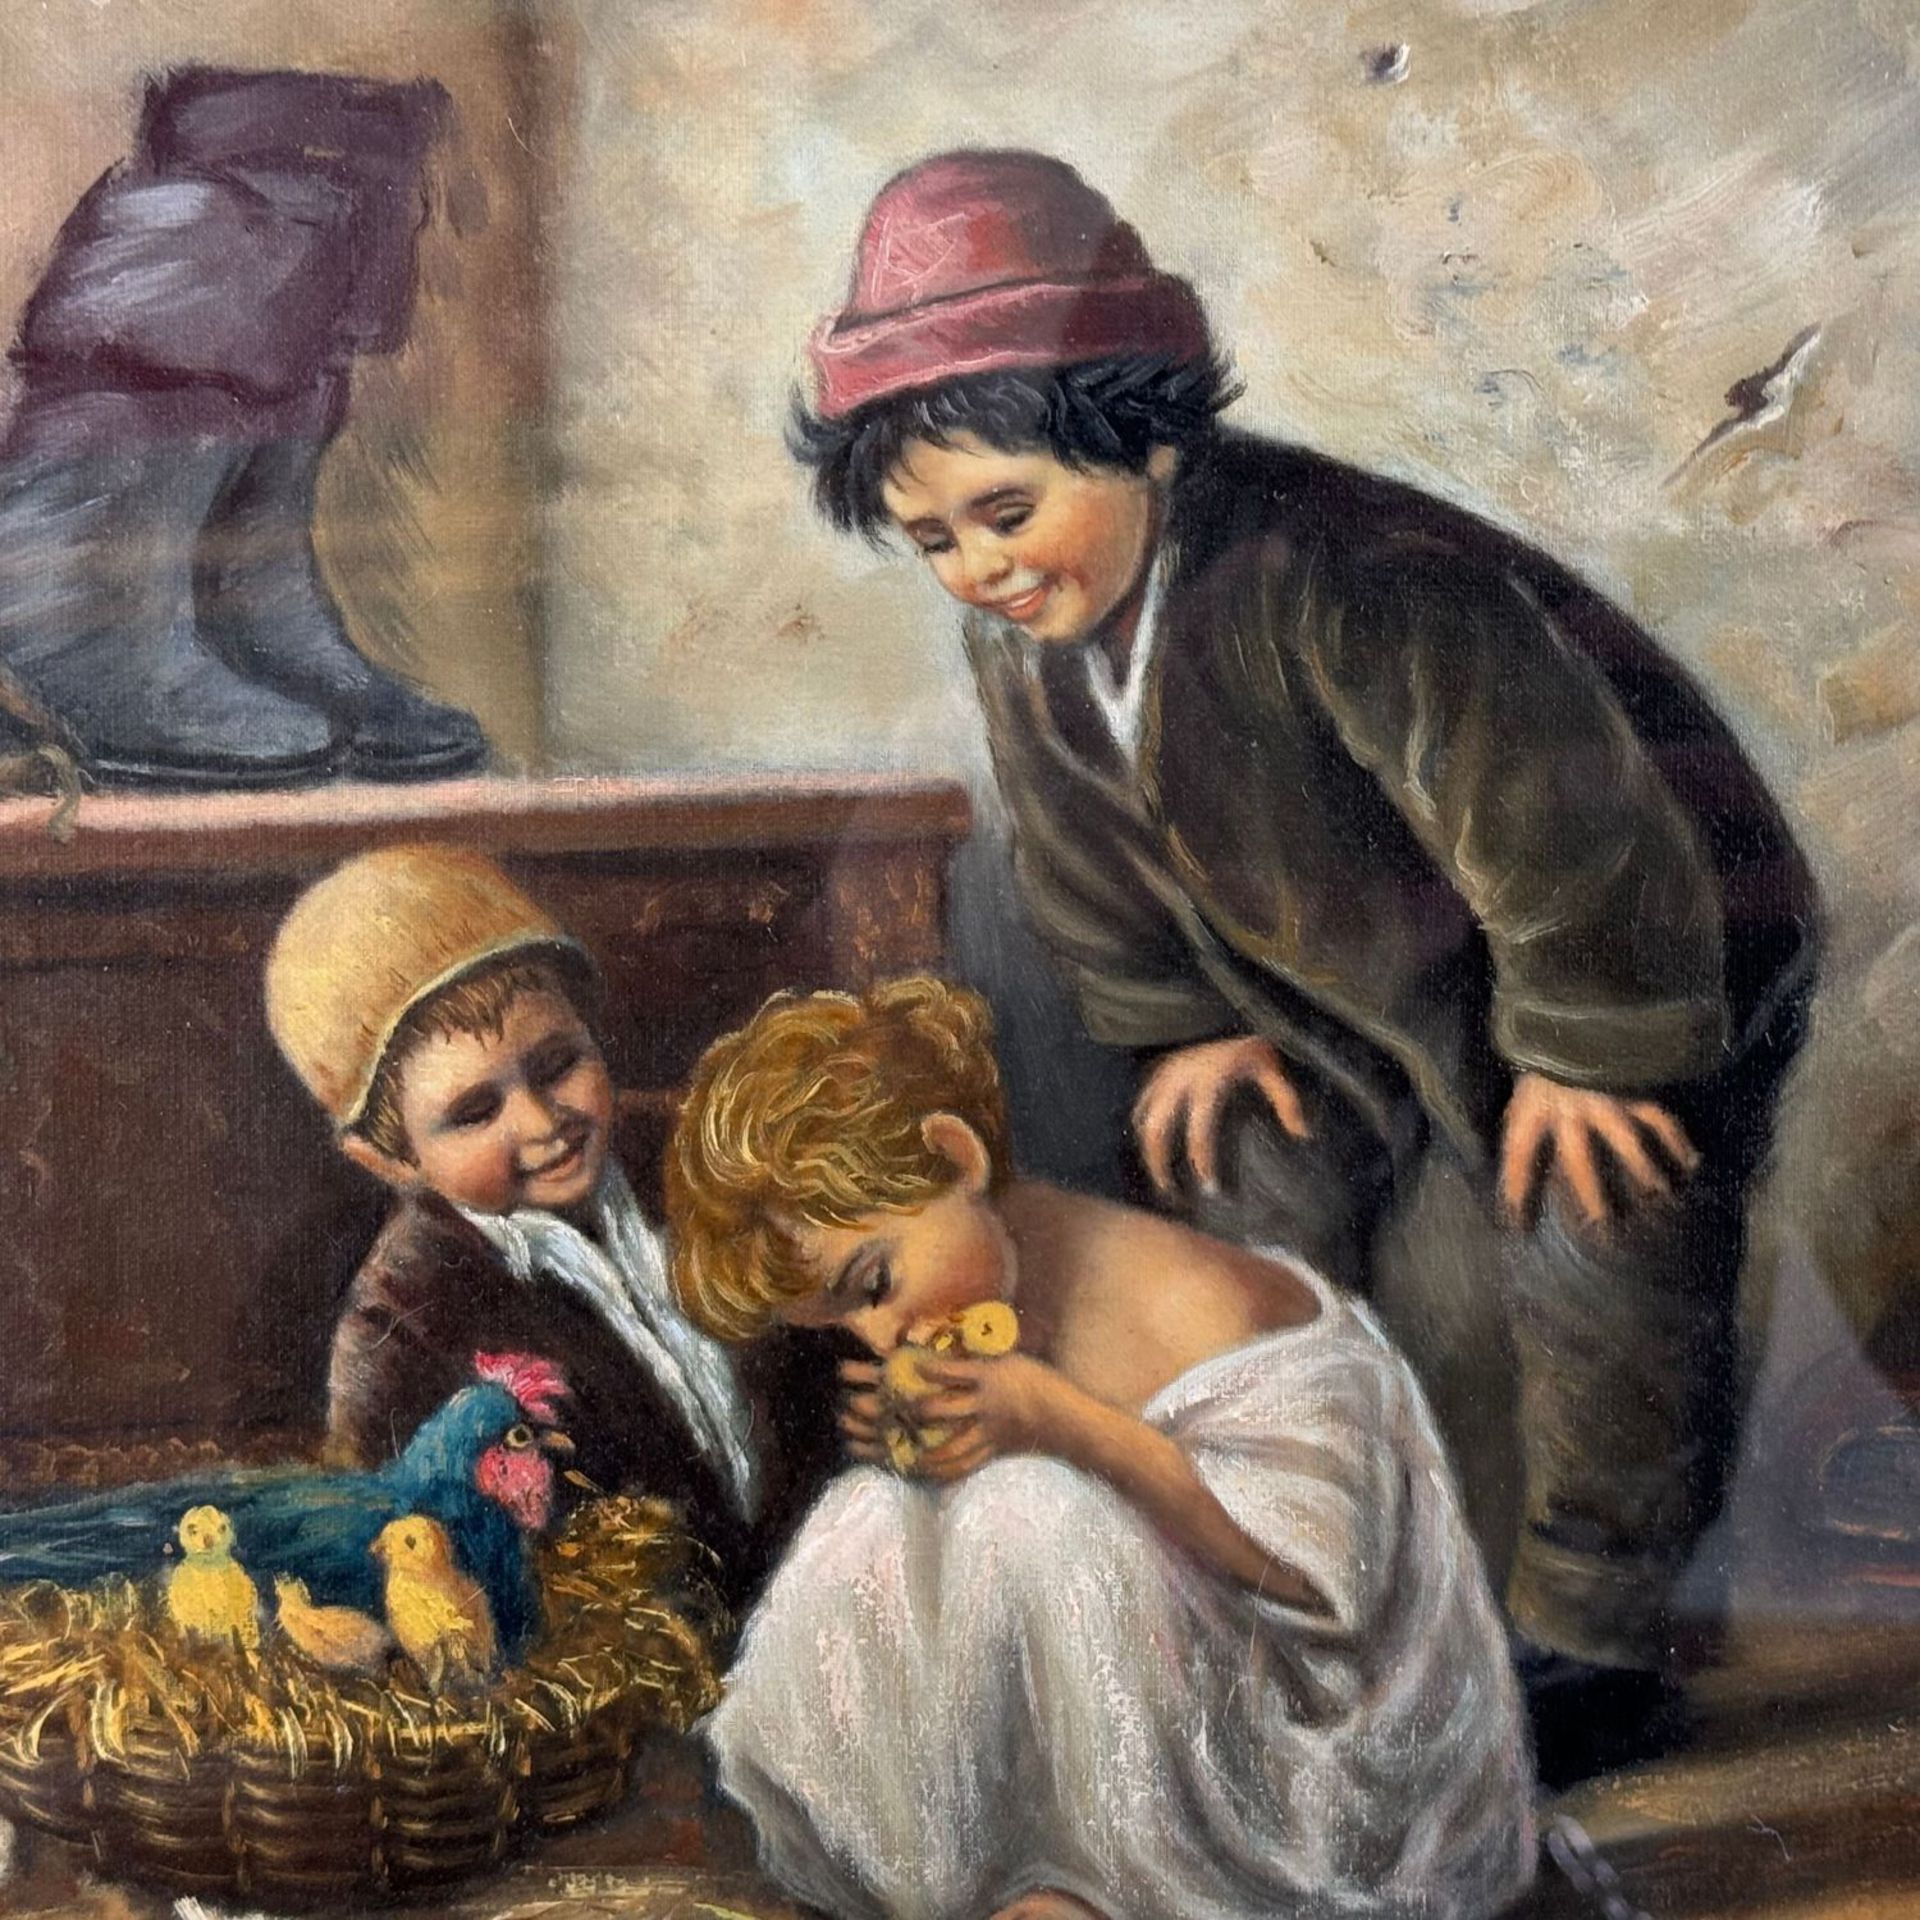 Children playing with chicks - Di Gennaro - Image 3 of 7